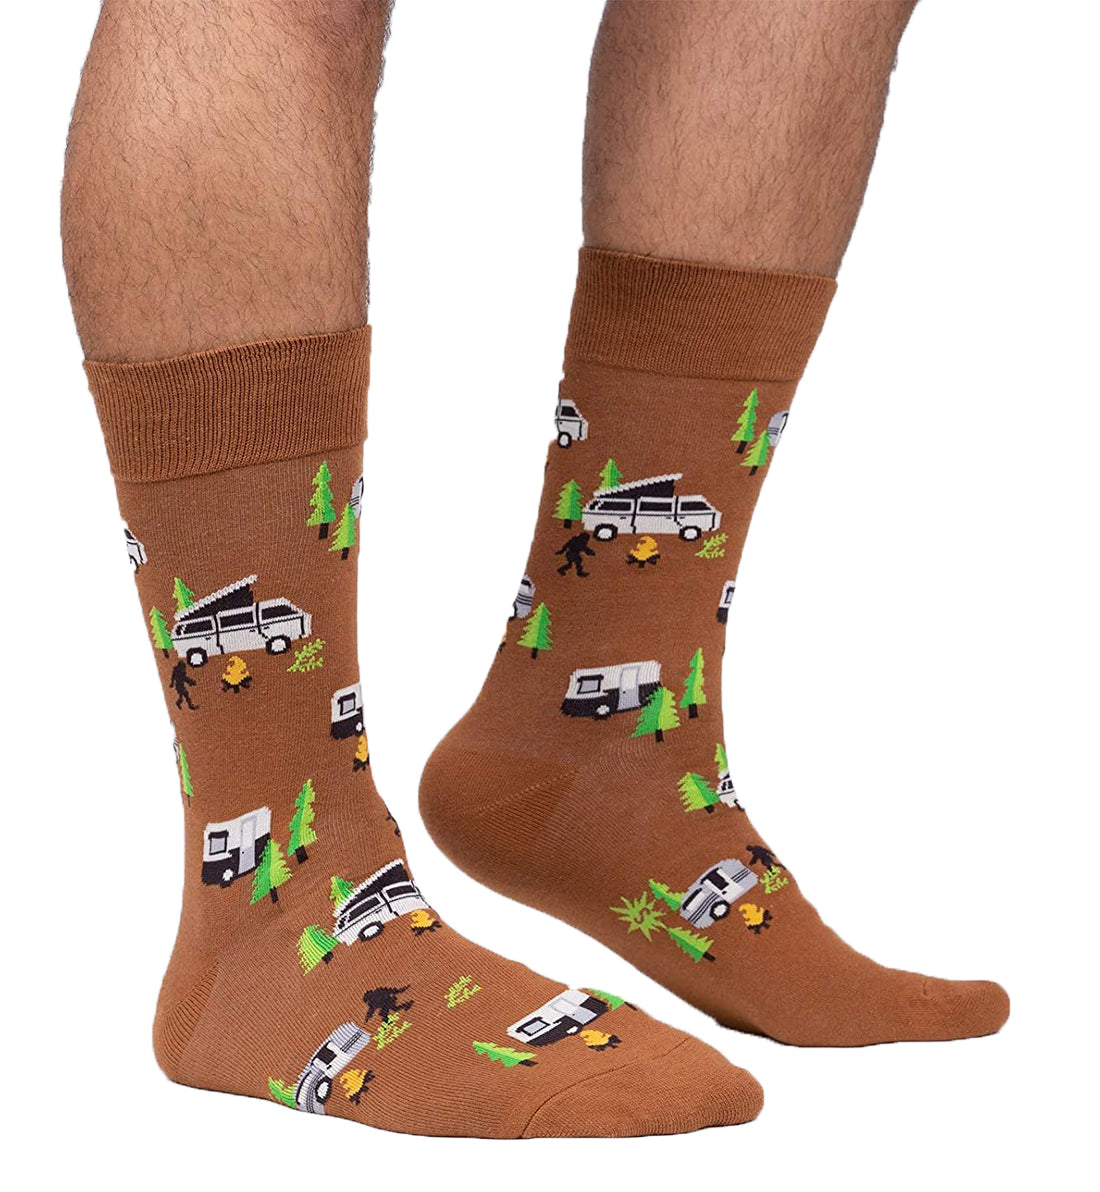 SOCK it to me Men's Crew Socks (mef0515),On The Road Again - On The Road Again,One Size